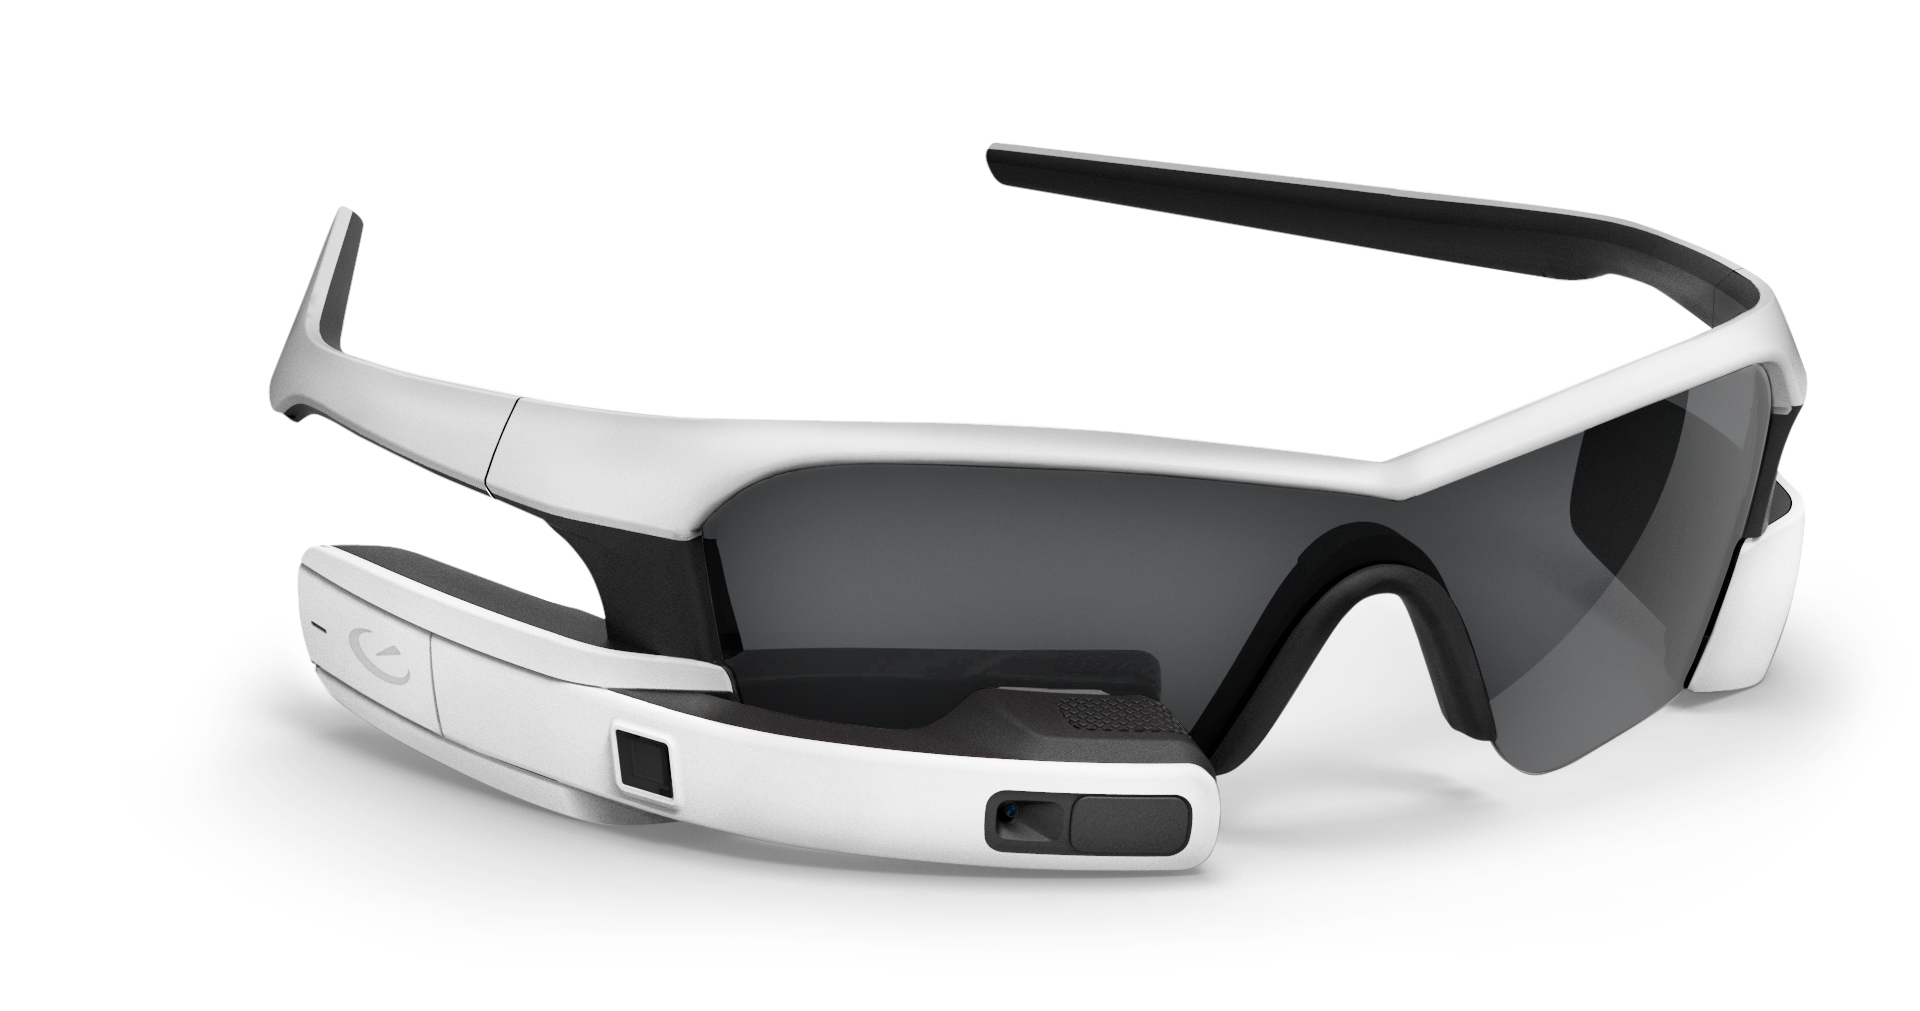 Recon Instrument Jet: Google Glass For The Sporty Types